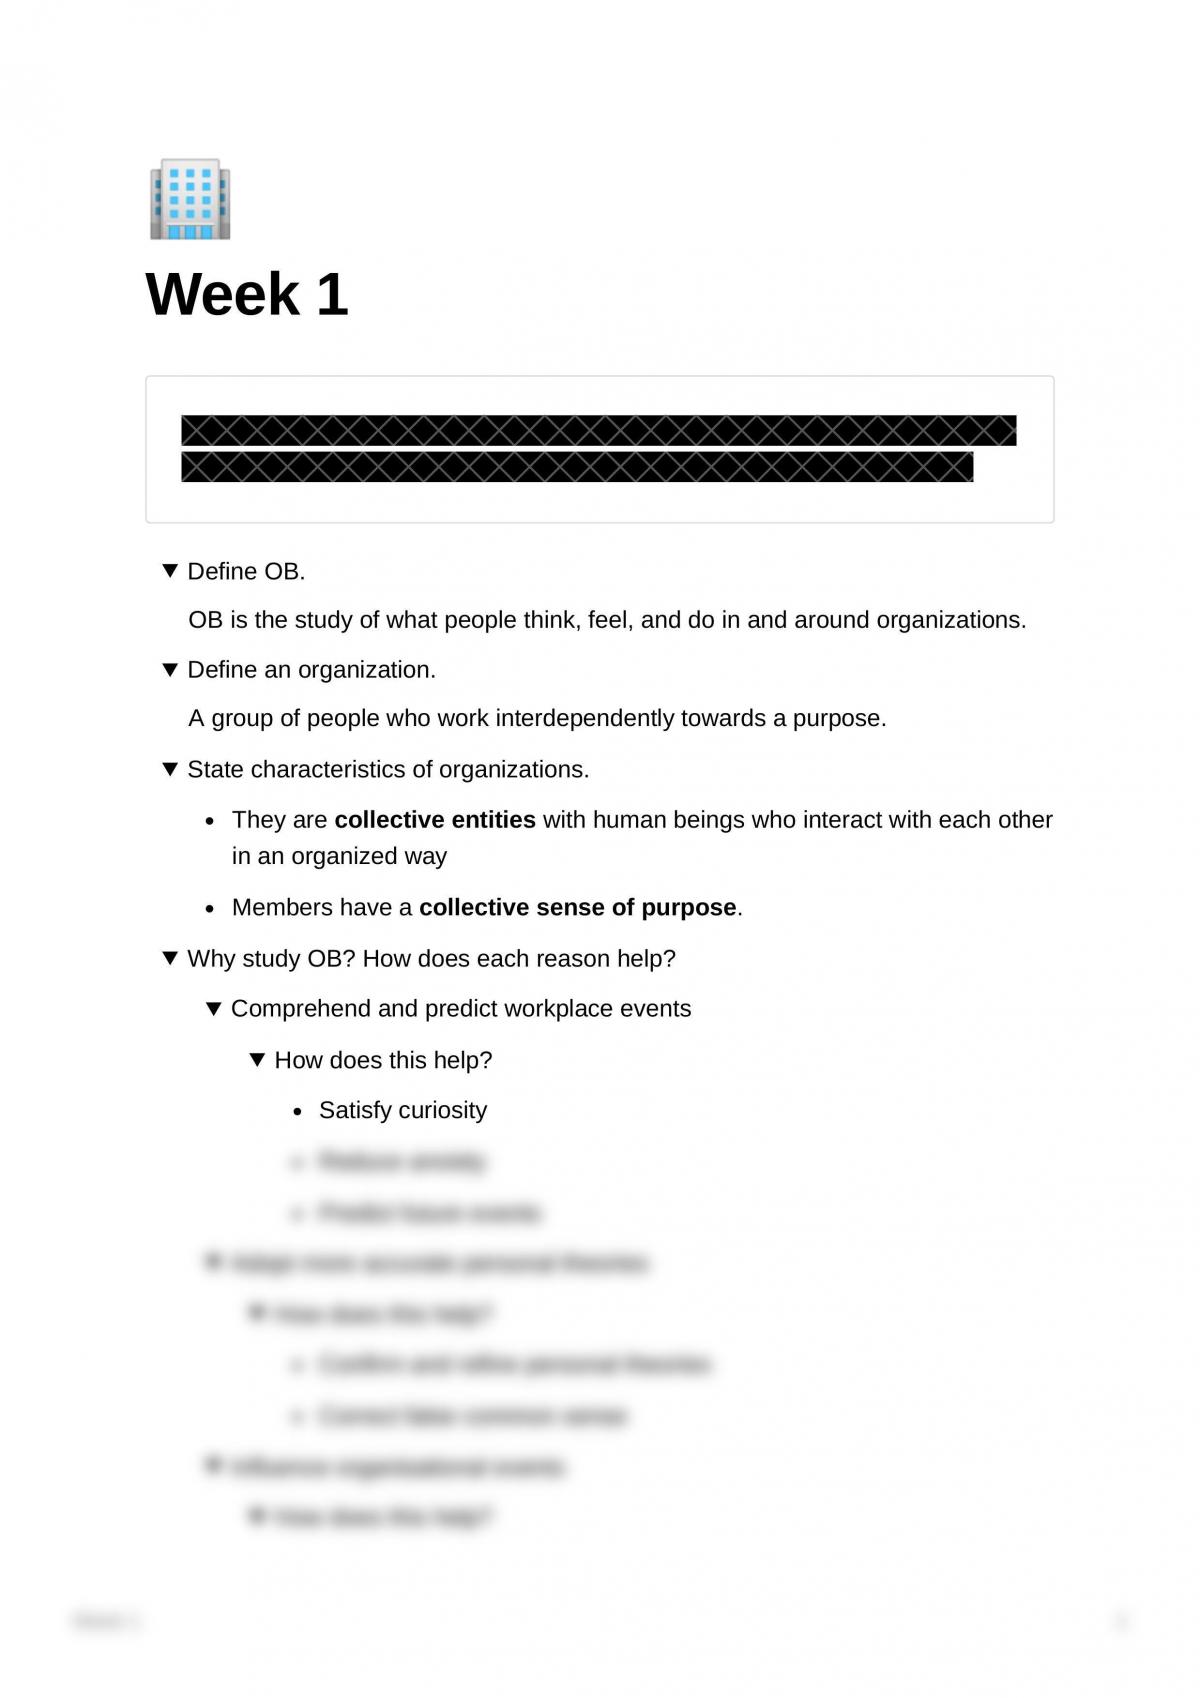 Week 1 Class Notes - Page 1